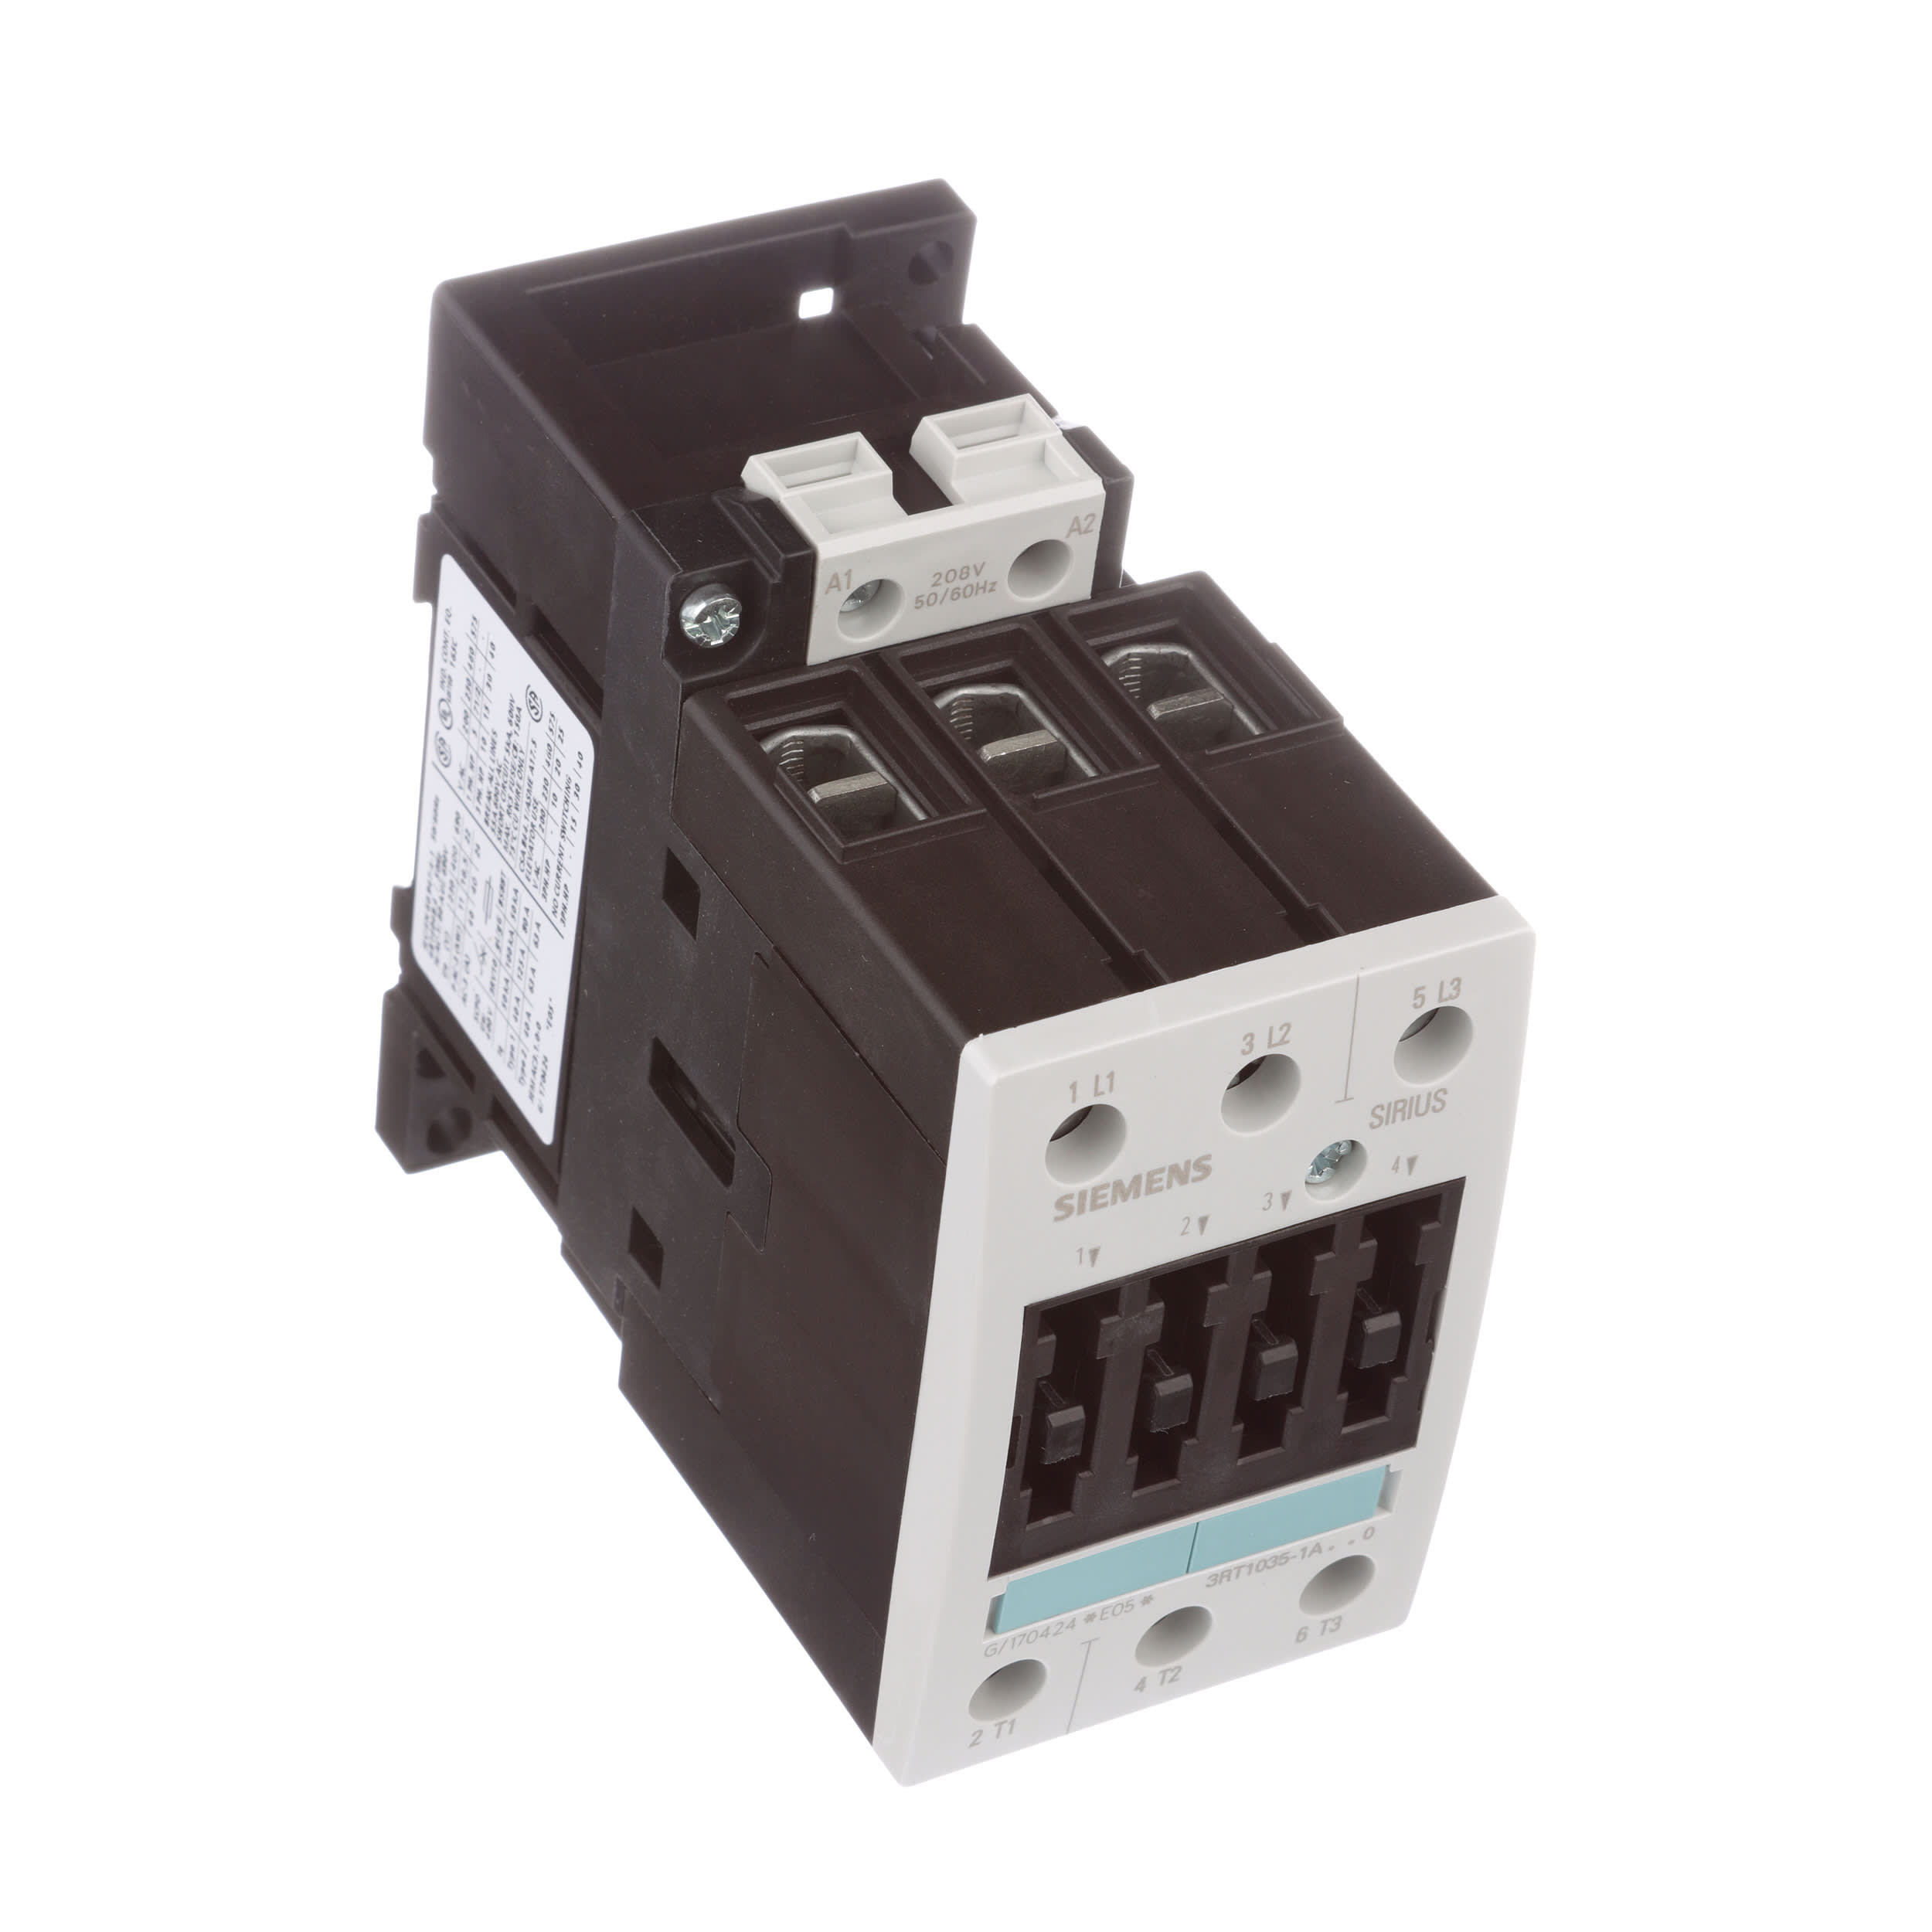 * NEW NO BOX * AS PICTURED SIEMENS 3RT1035-1AM20 CONTACTOR 208V 